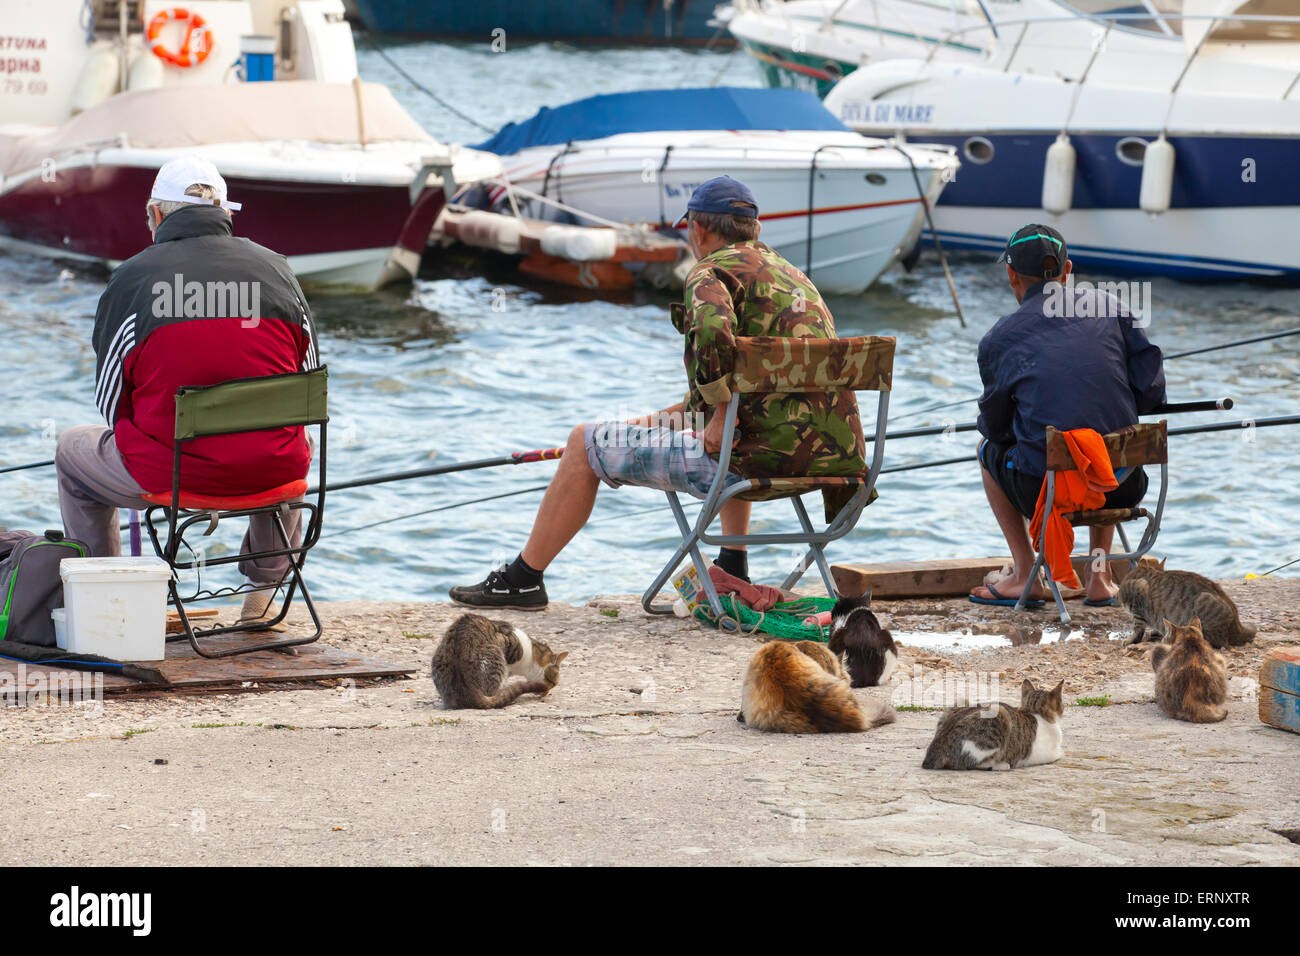 Varna, Bulgaria - July 20, 2014: Senior fishermen catch fish from the shore, group of street cats waiting for haul Stock Photo